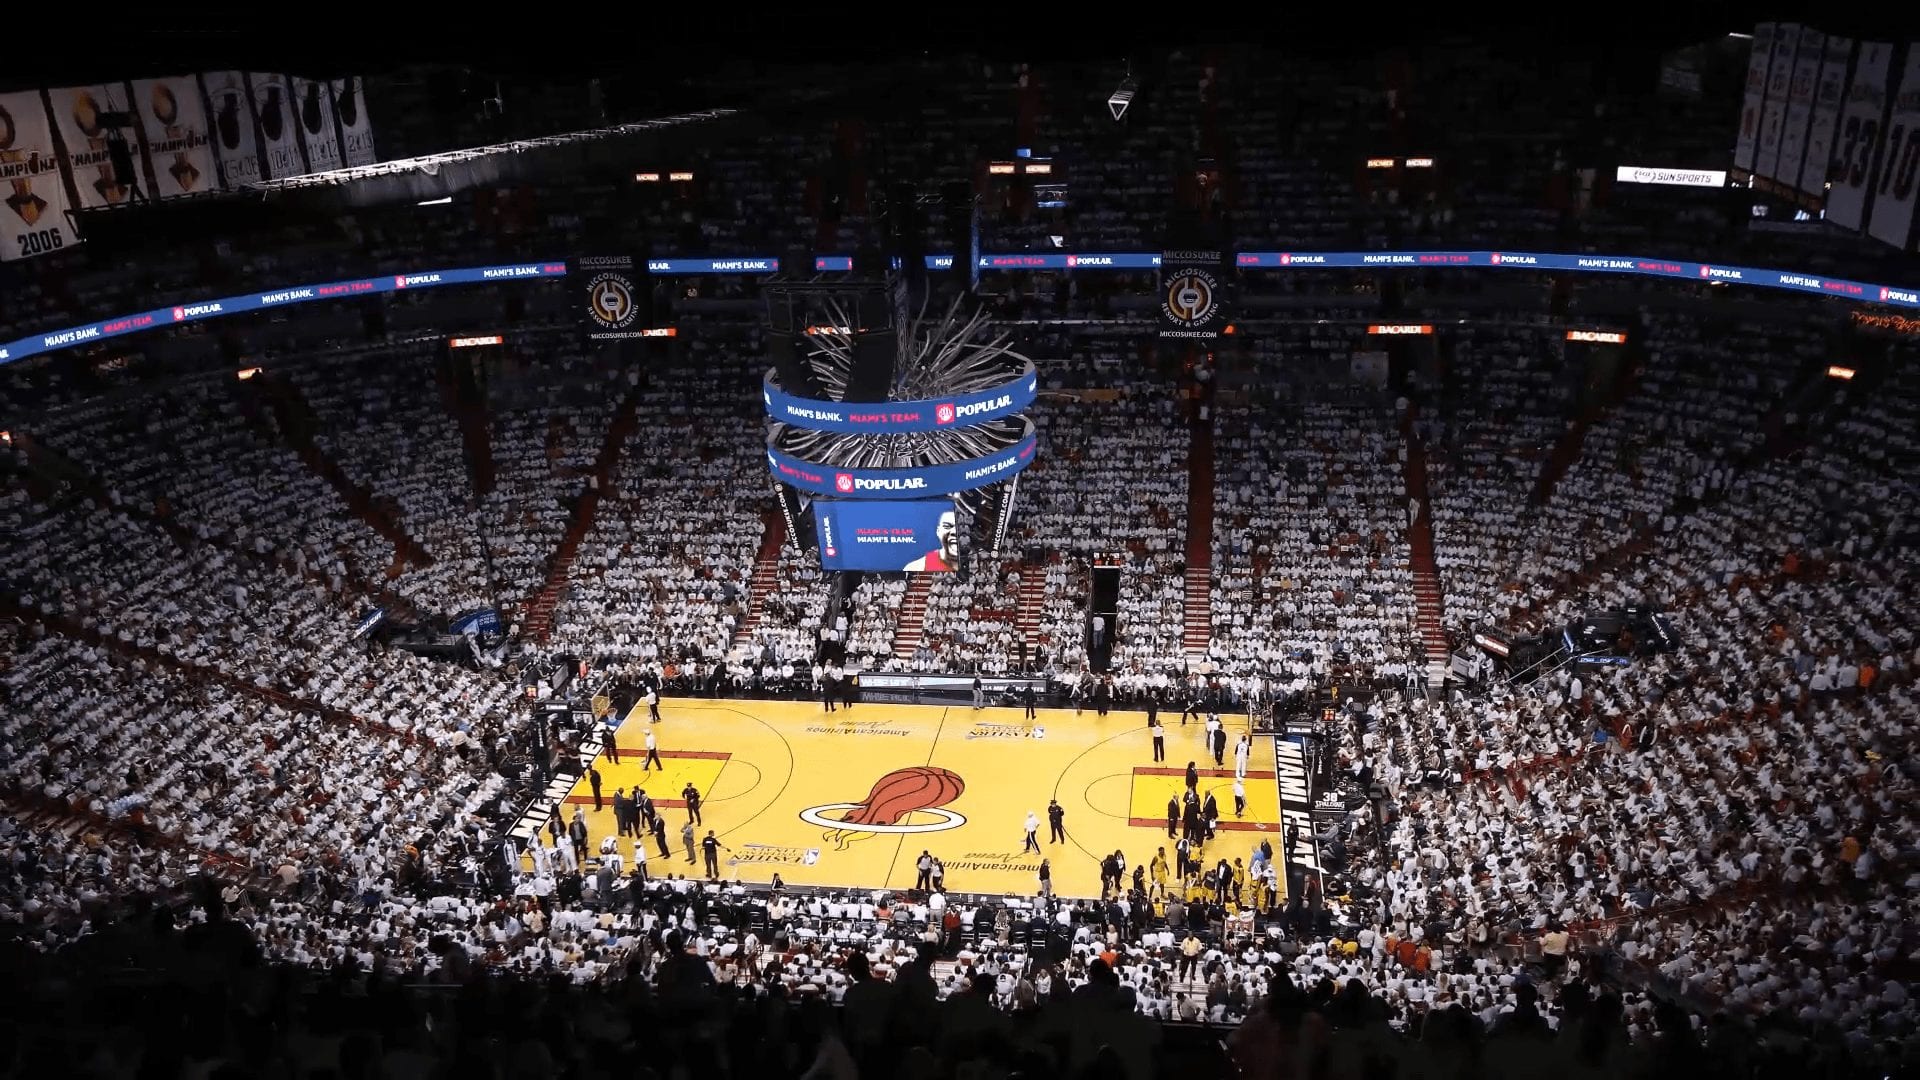 Photos at Miami Heat Store American airlines Arena - Sporting